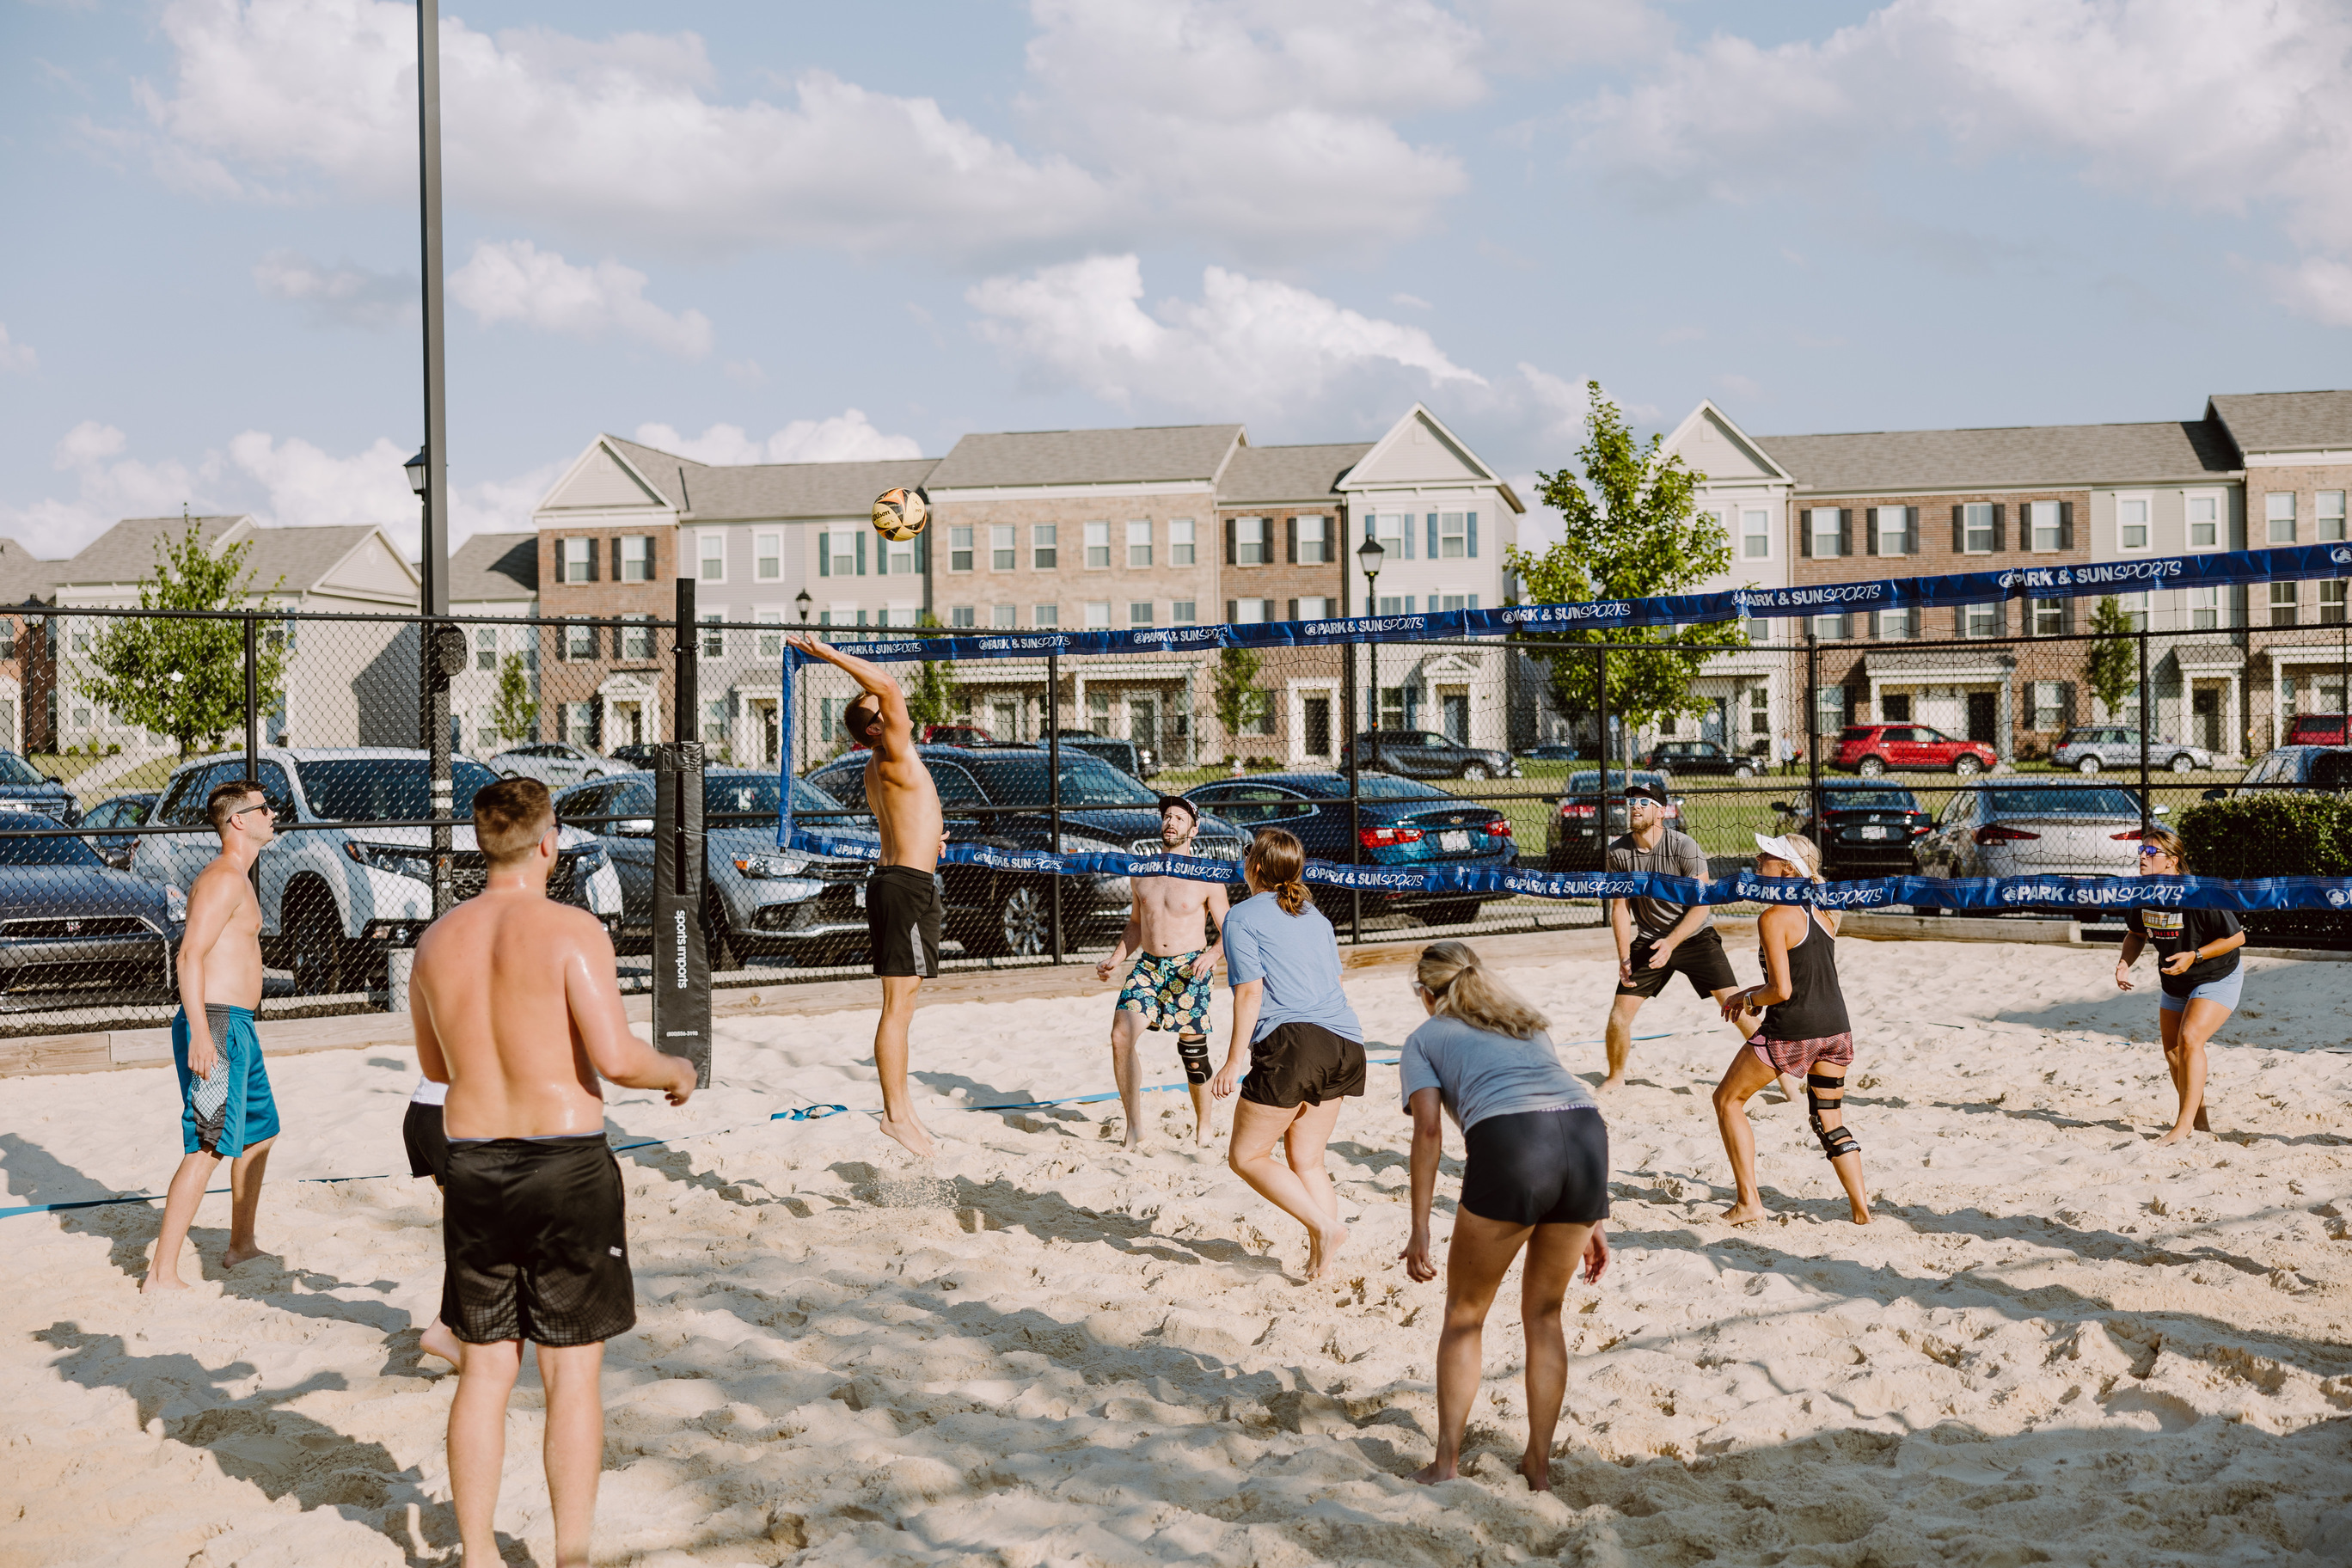 Ohio Schedule : The Goat Sand Volleyball